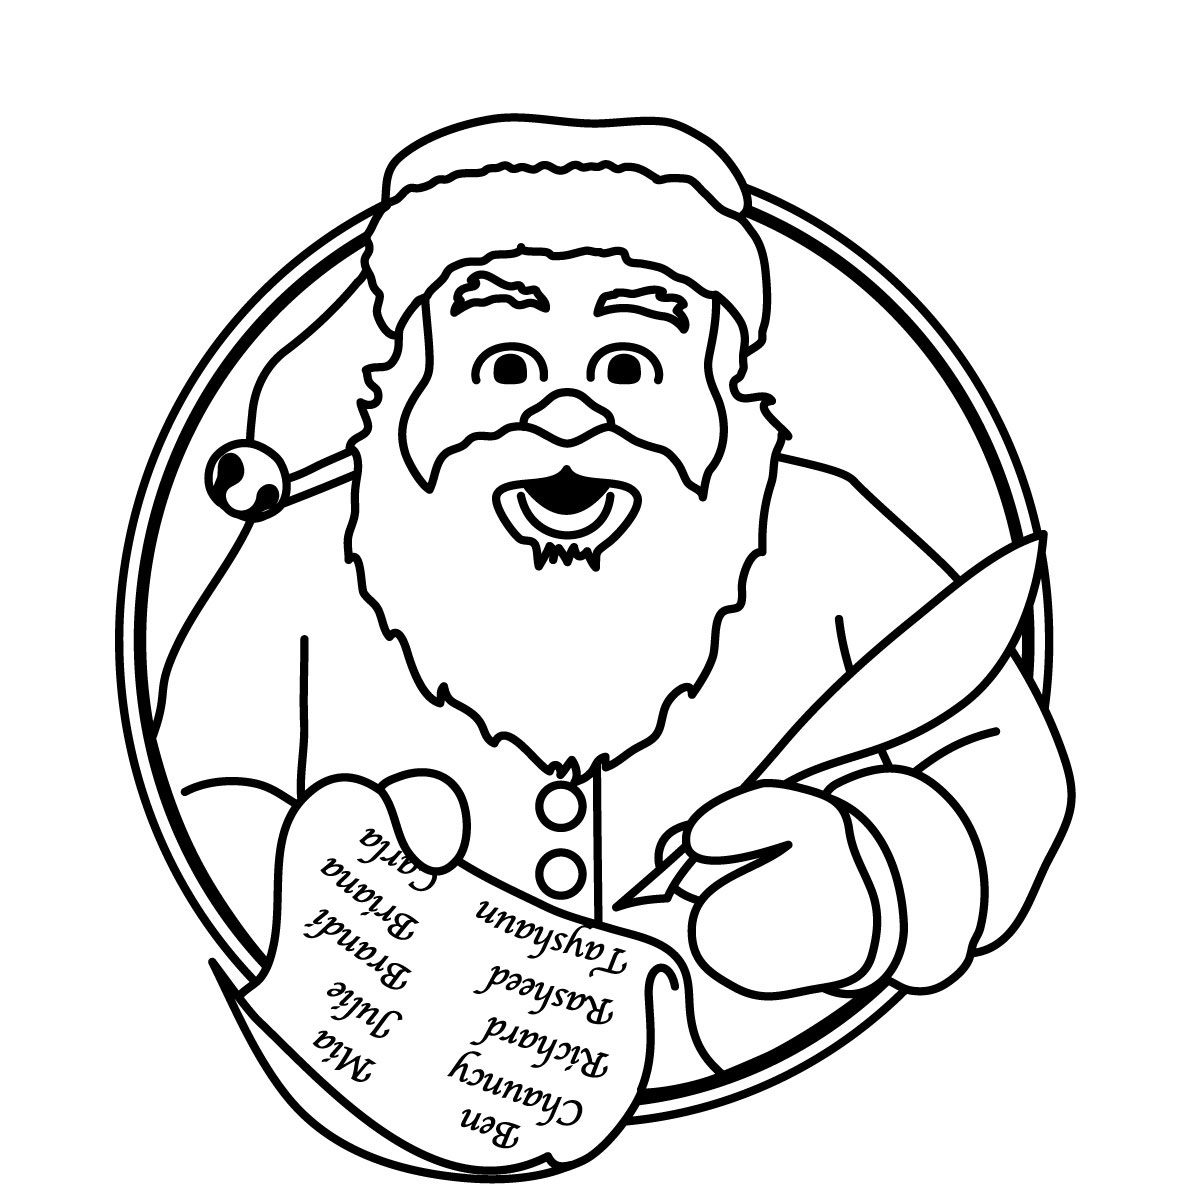 Christmas Ornament Clipart Black And White - Free ...